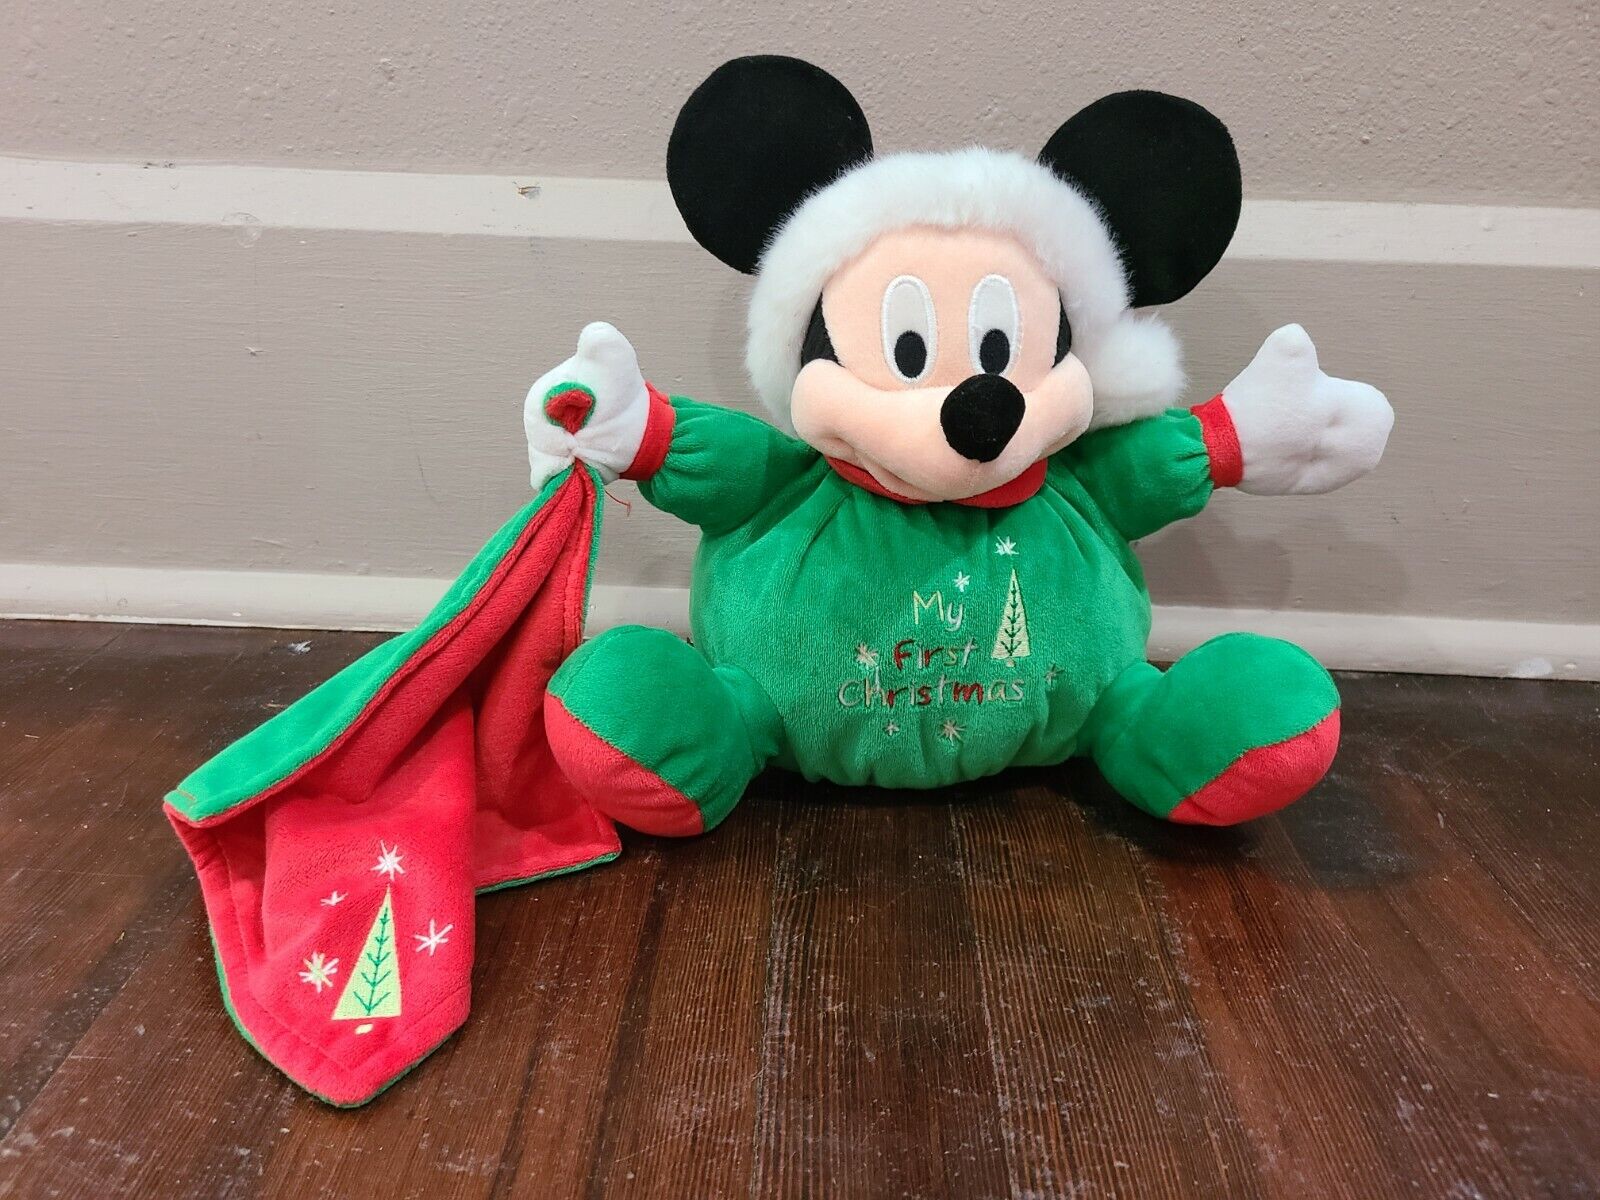 Disney Store 10” Baby Mickey My First Christmas Santa Round Plush with Blanket